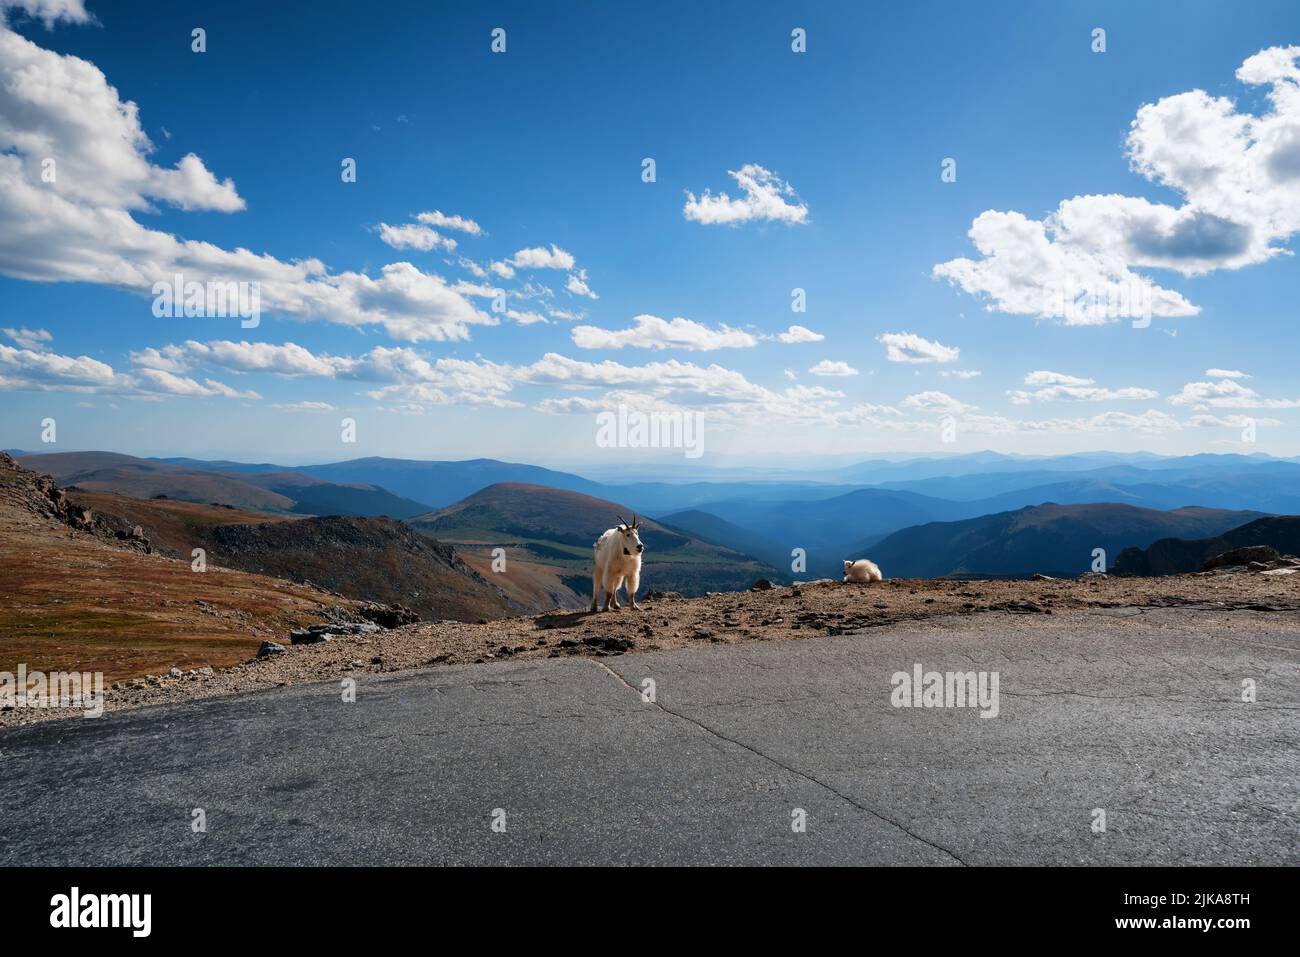 Mountain goats along the steep road up to the summit of Mount Evans, Rocky Mountains, Colorado, USA Stock Photo